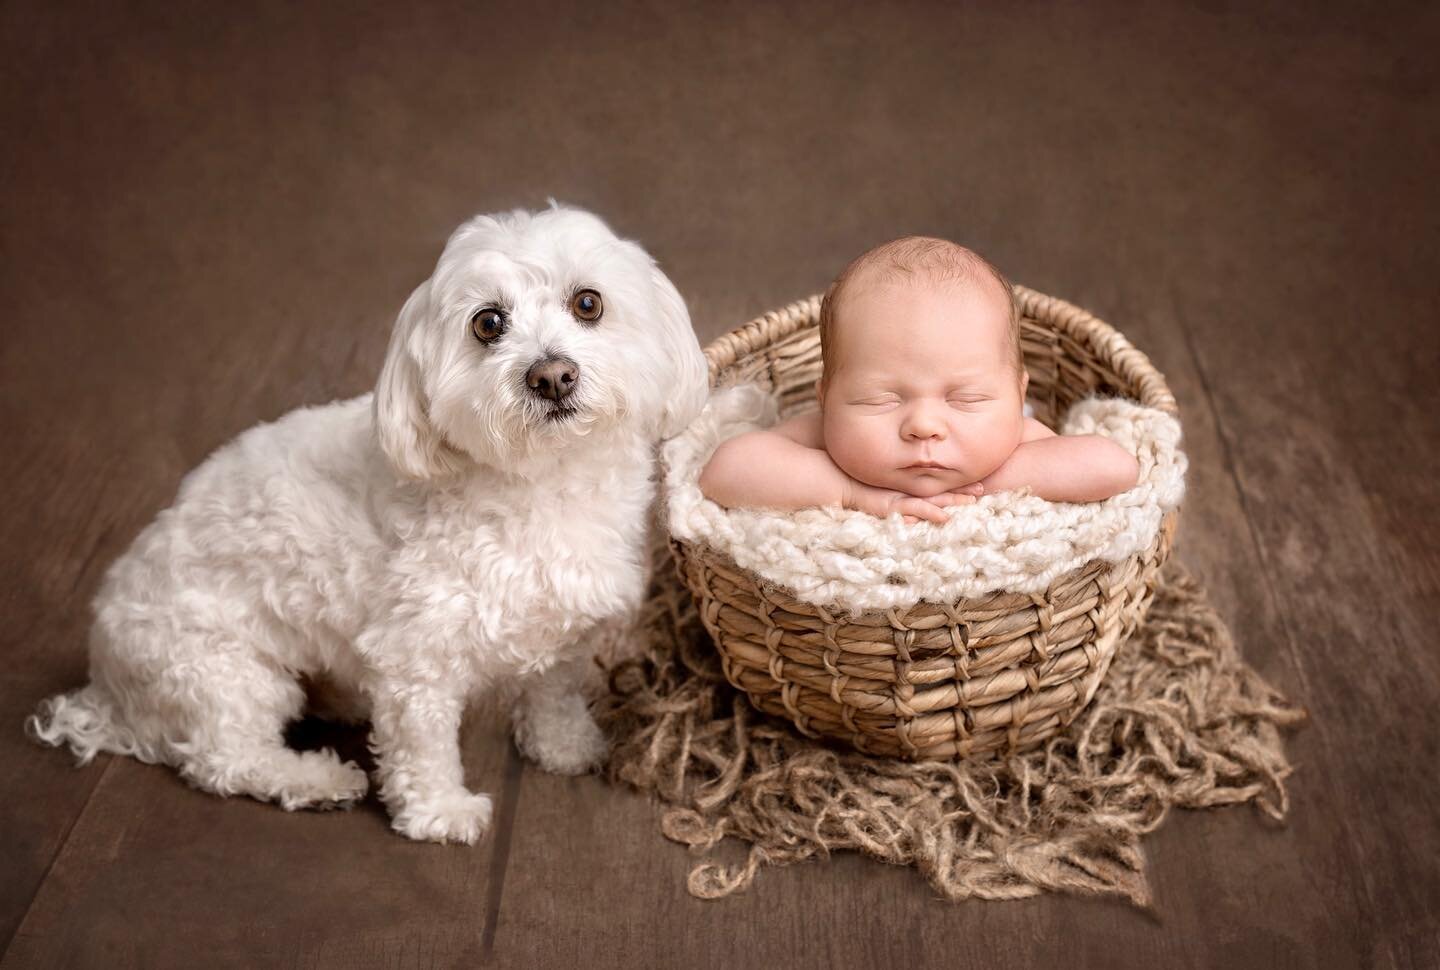 I love creating a portrait with a new baby, especially if it includes a fur baby too!

#furbaby #dog #dogphotographyuk #newbornphotography #newbornbaby #mumtobe #babyshower #portraitphotography #dogsofinstagram #doglover #dogandbaby #babyanddog #ilov